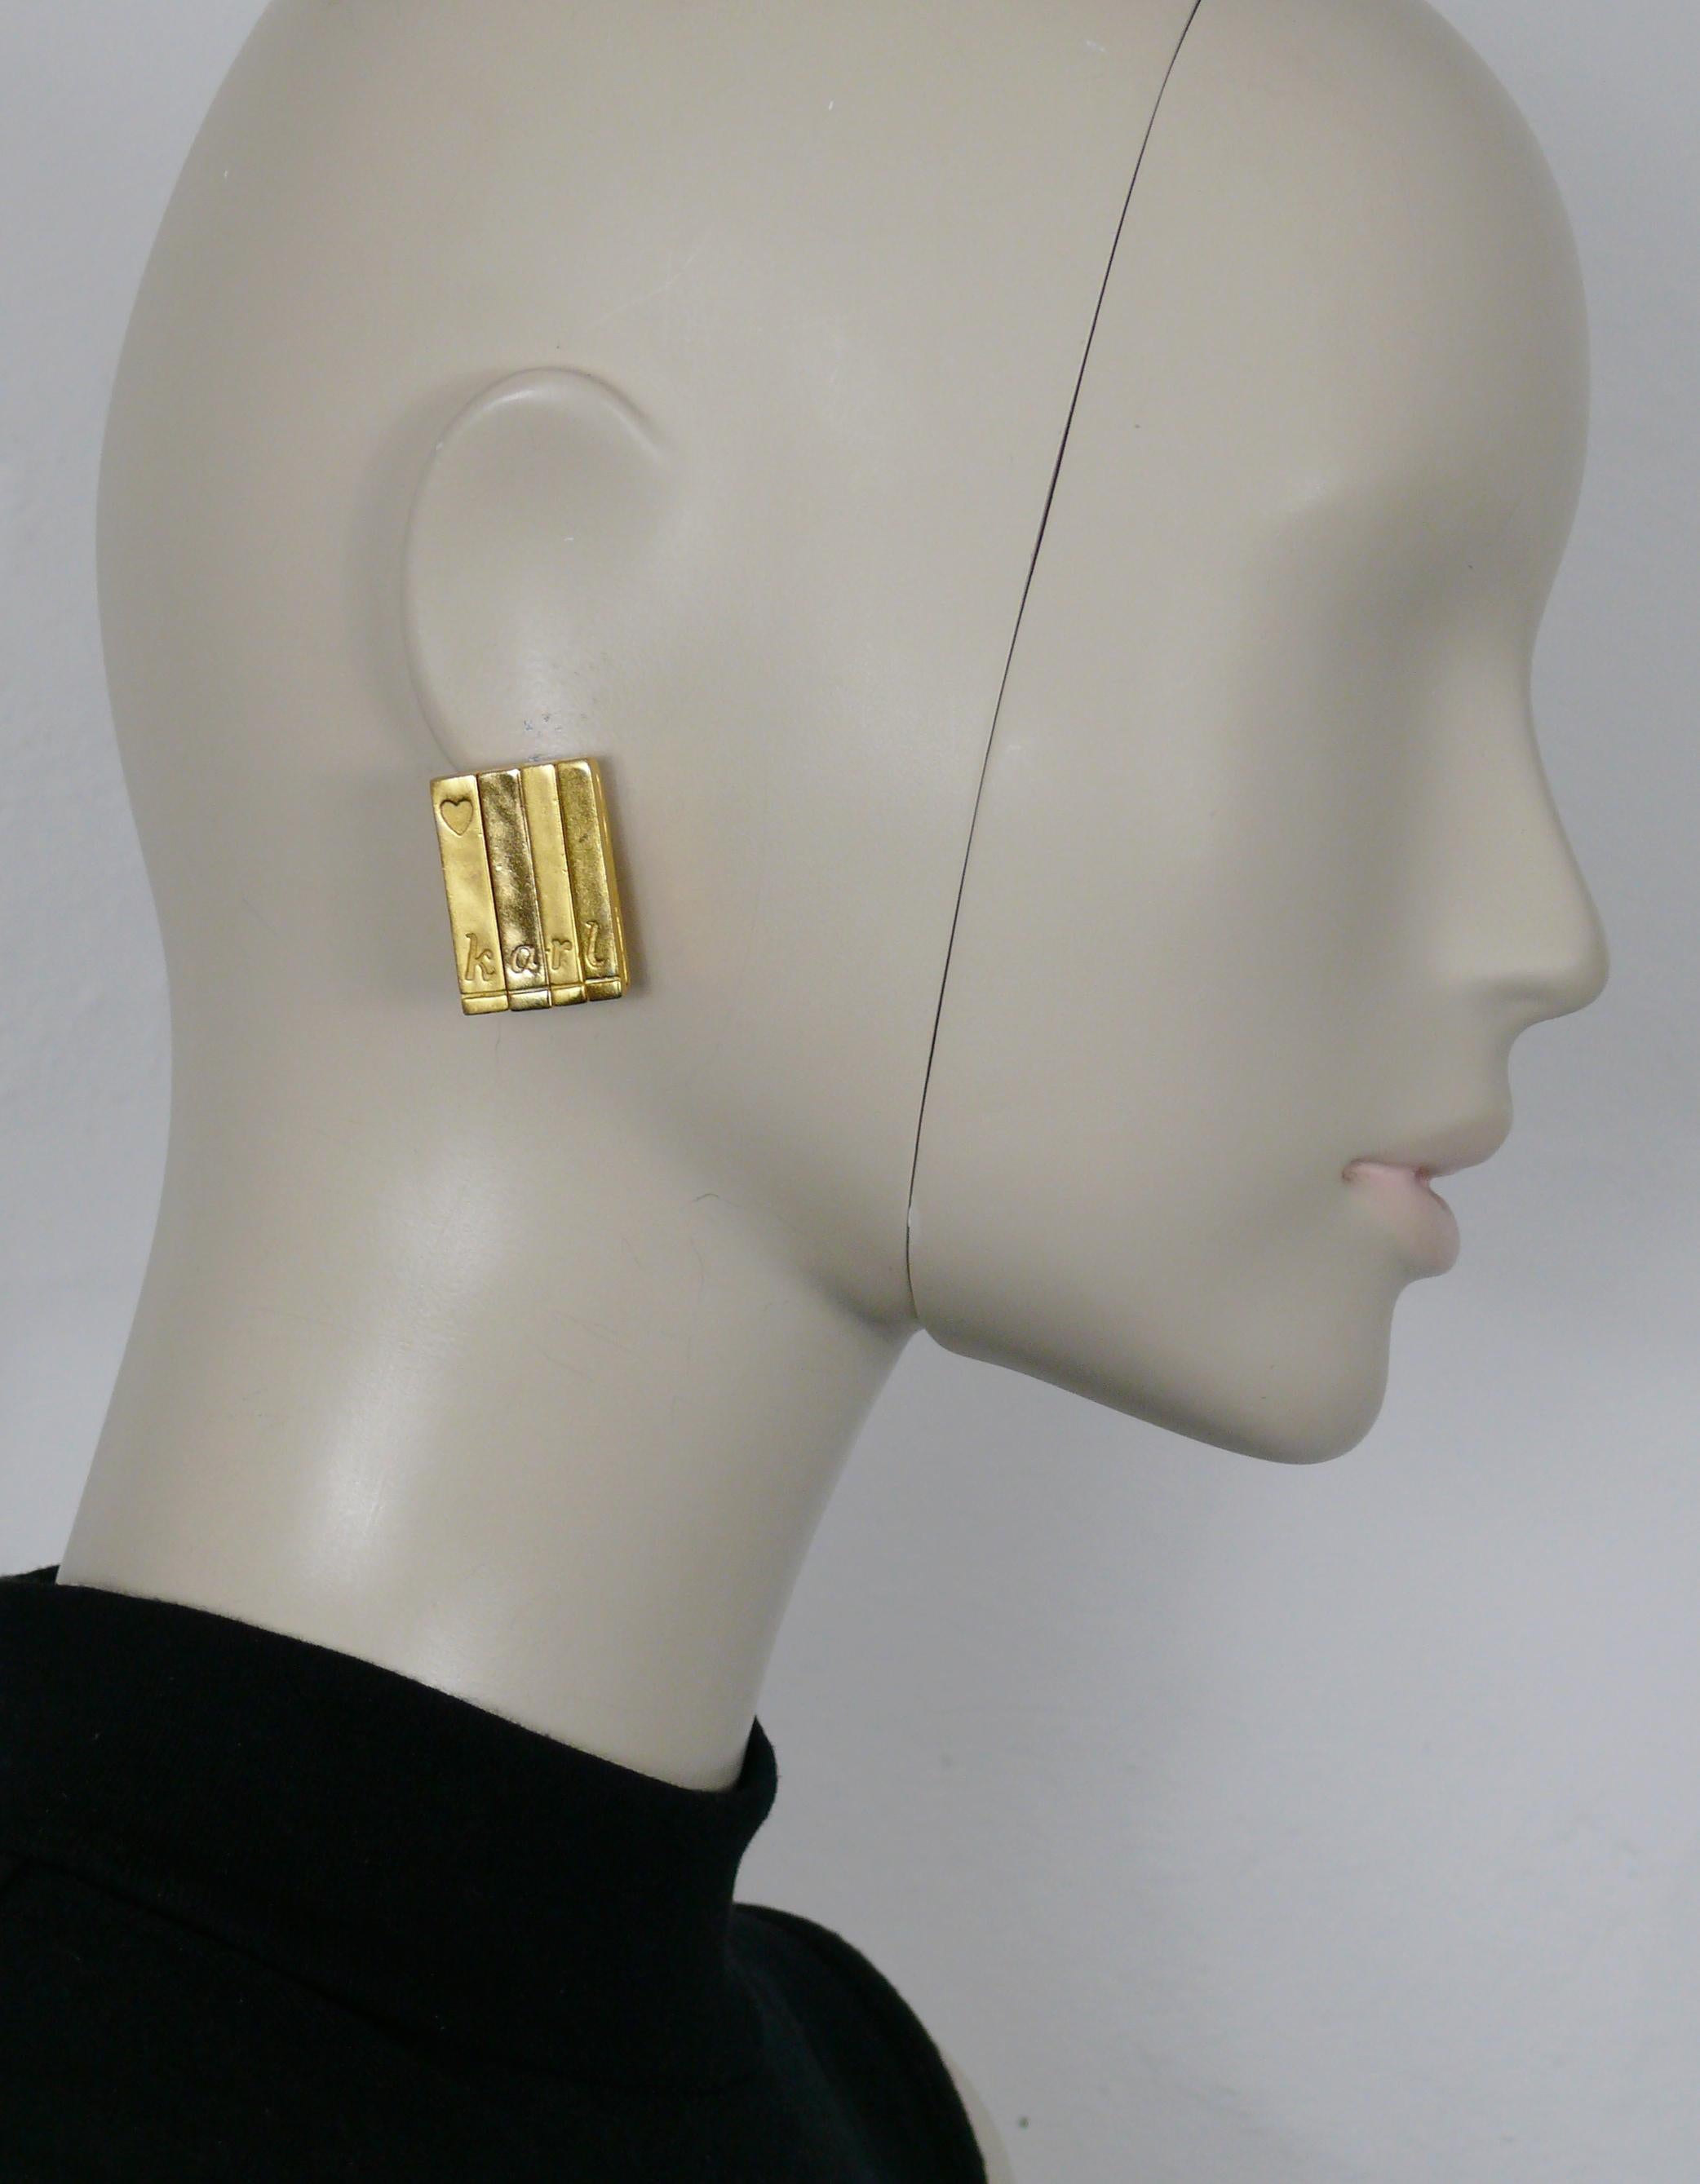 KARL LAGERFELD vintage gold toned rectangular clip-on earrings featuring book spines embossed with a heart and K A R L.

Embossed KL on the reverse side.

Indicative measurements : height approx. 3 cm (1.18 inches) / width approx. 2 cm (0.79